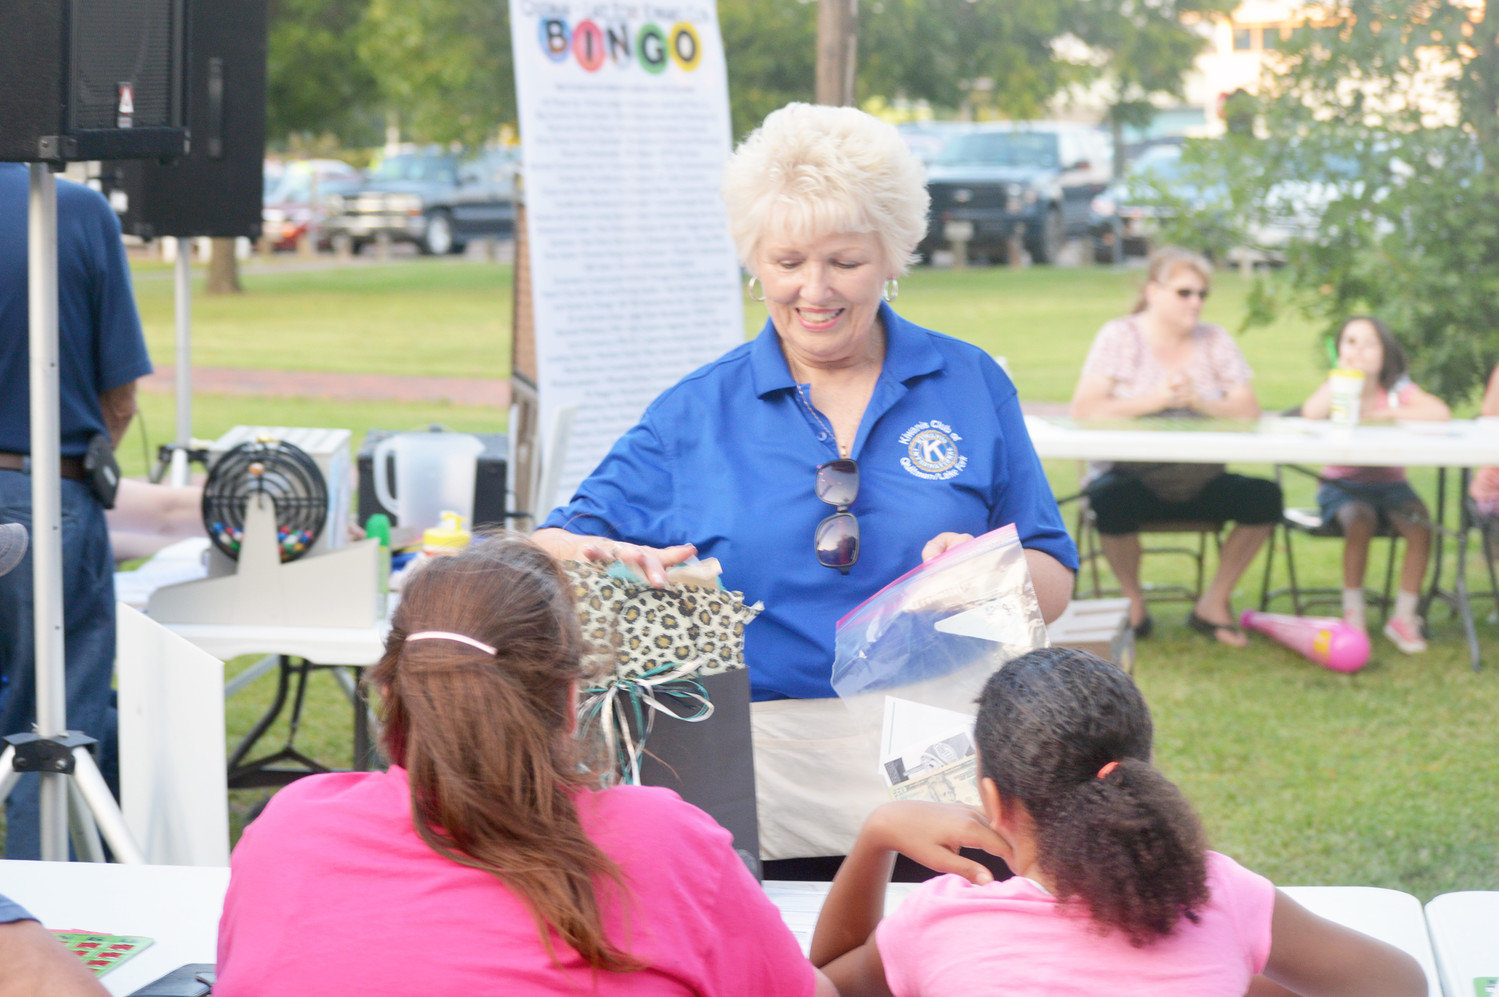 Annette Simpkins was busy working the crowded Bingo games during Old Settlers Reunion time at Jim Hogg City Park in Quitman last week.